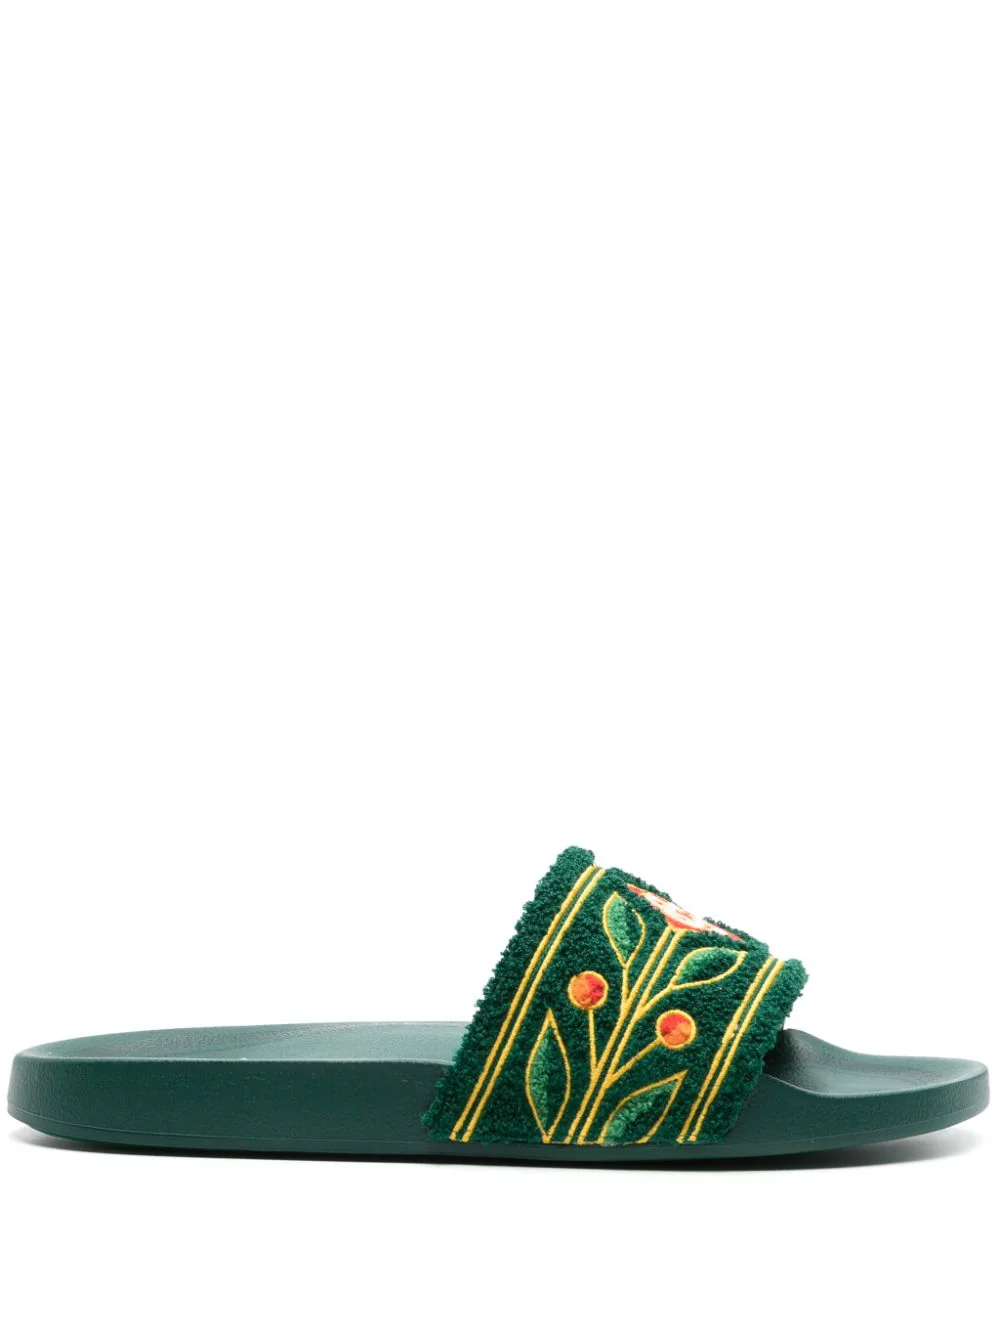 Casablanca Slide Sandals With Embroidery In Green